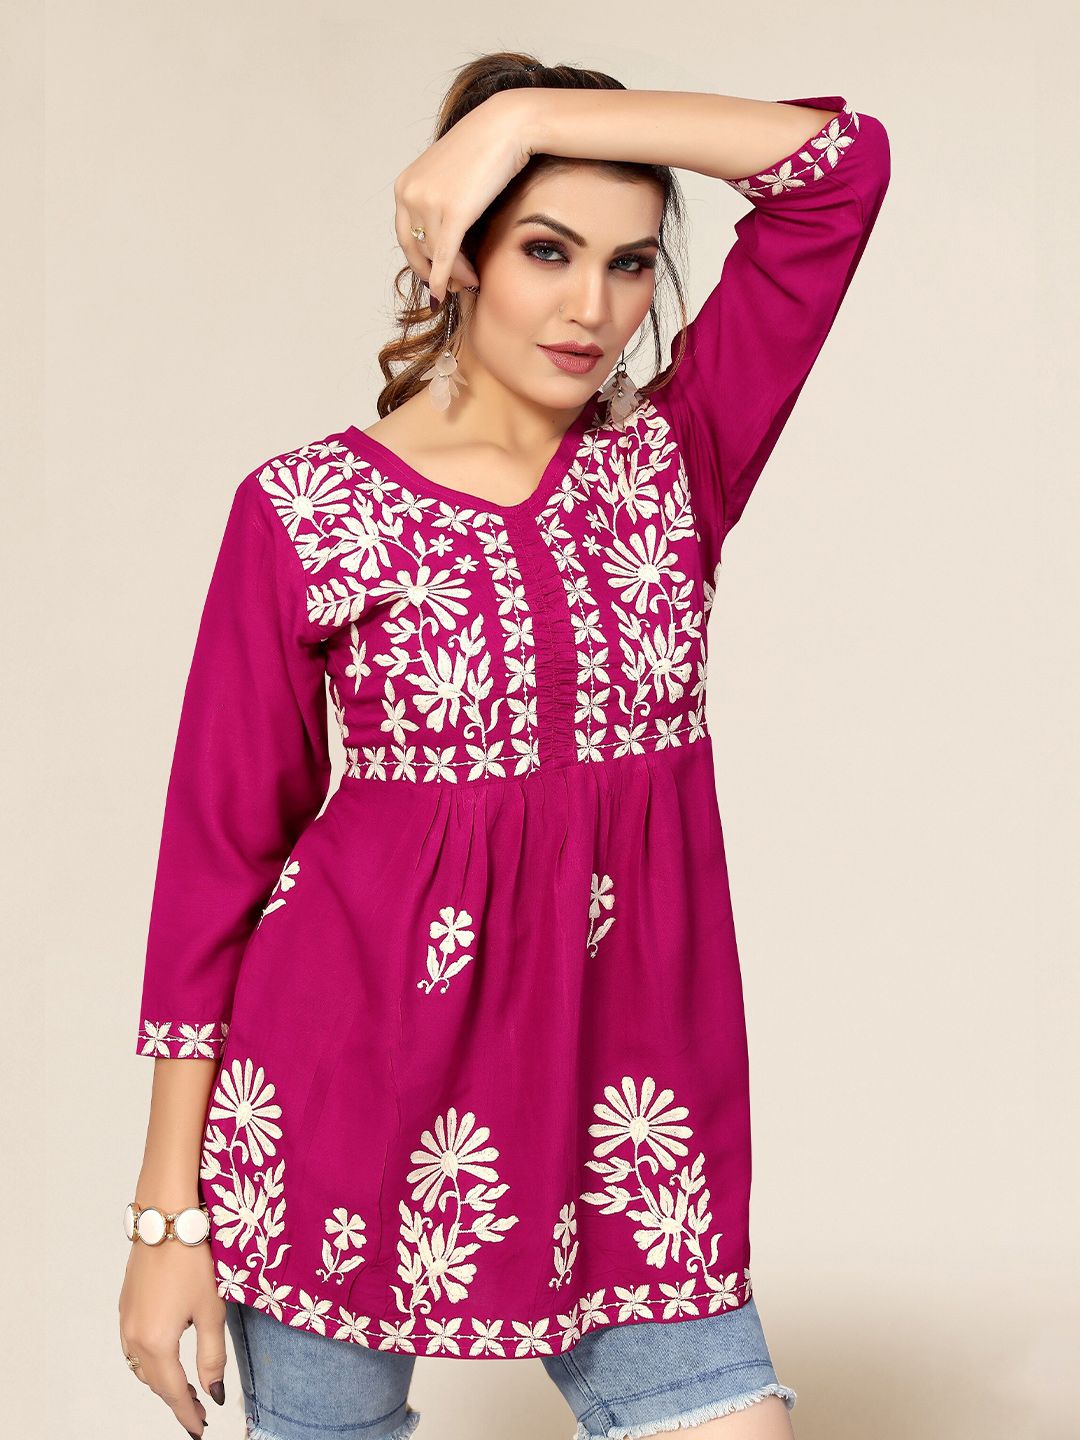 Winza Designer Pink Floral Embroidered Top Price in India